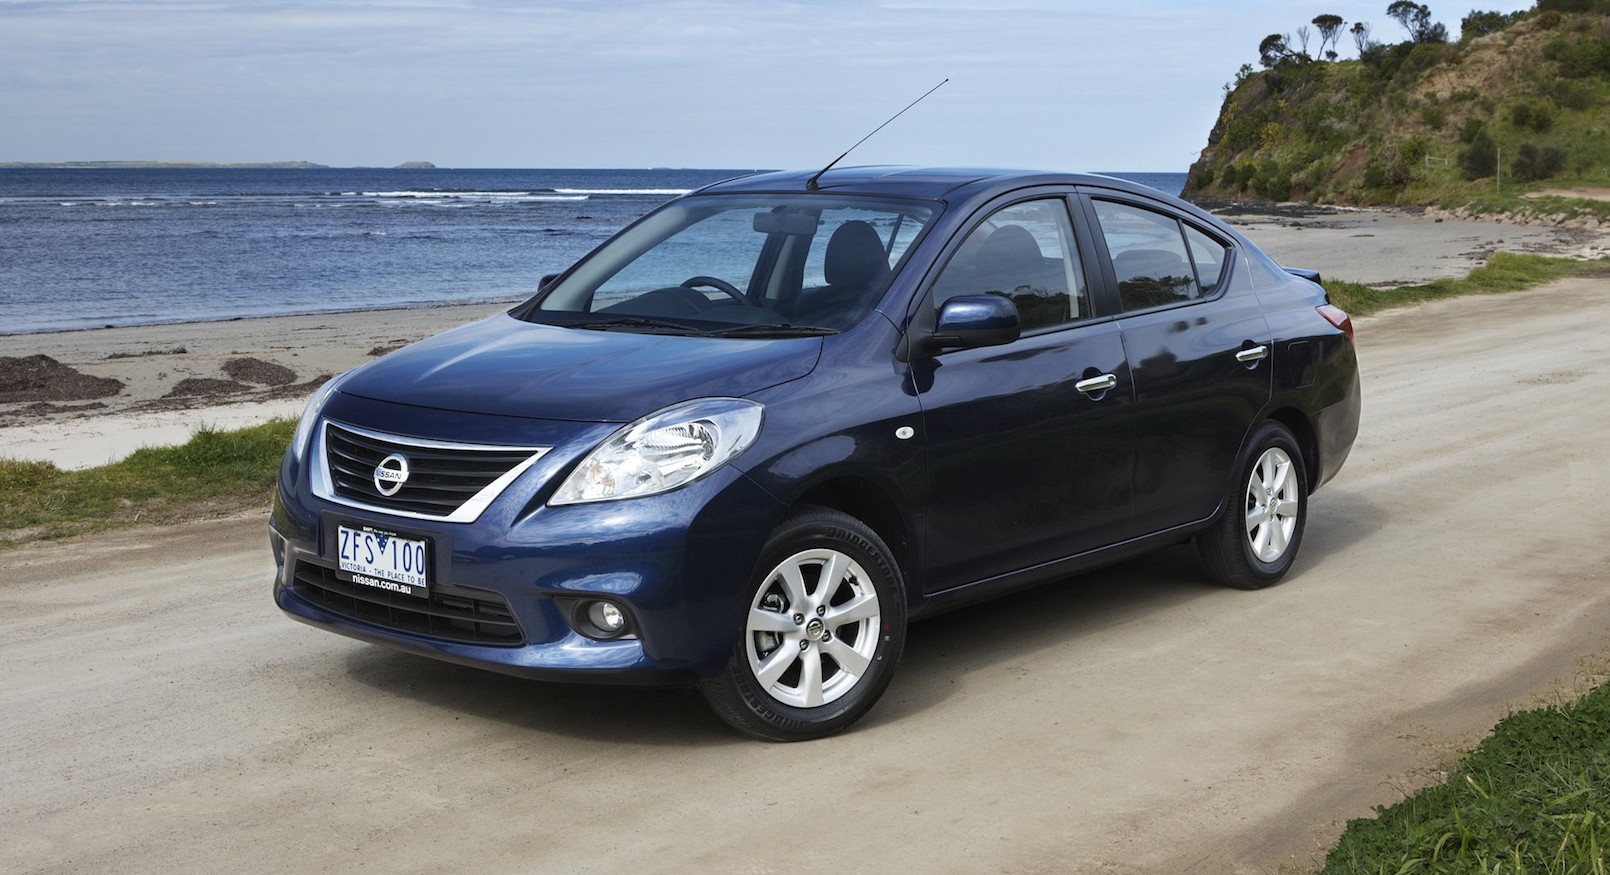 The launch of the pint-sized Nissan Almera sedan represents the beginning of